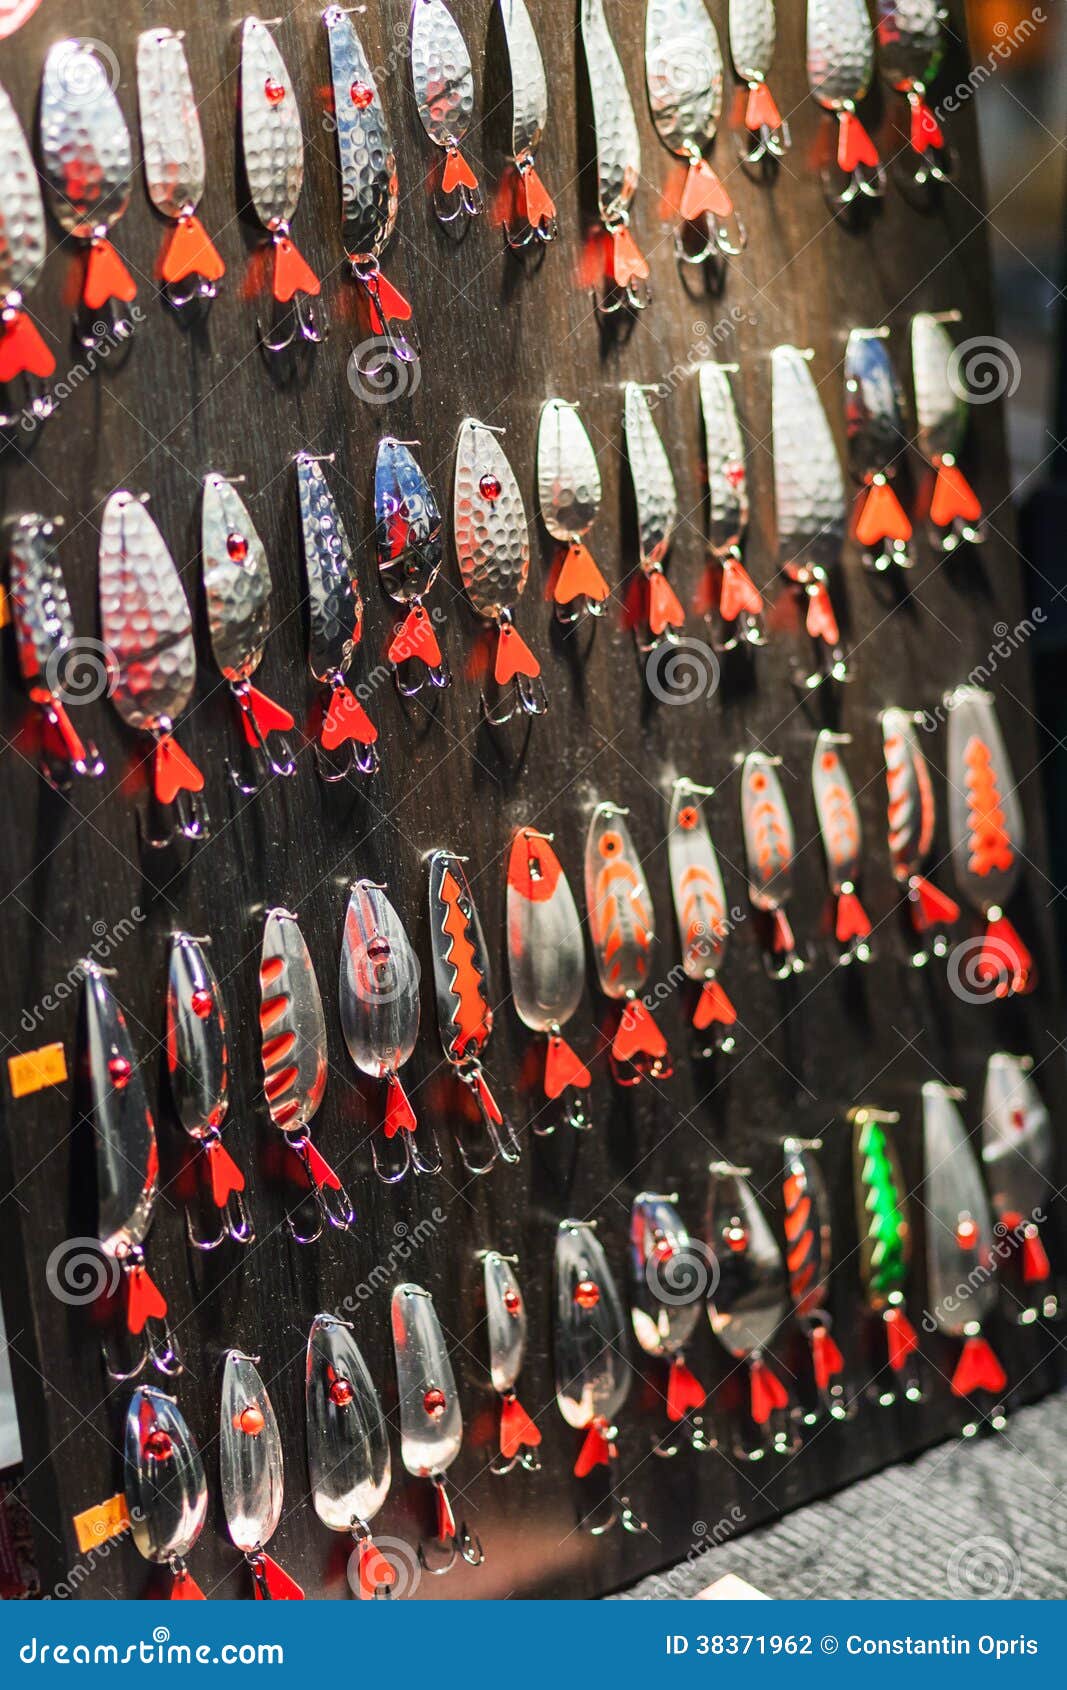 Fishing lures on display stock photo. Image of specialized - 38371962